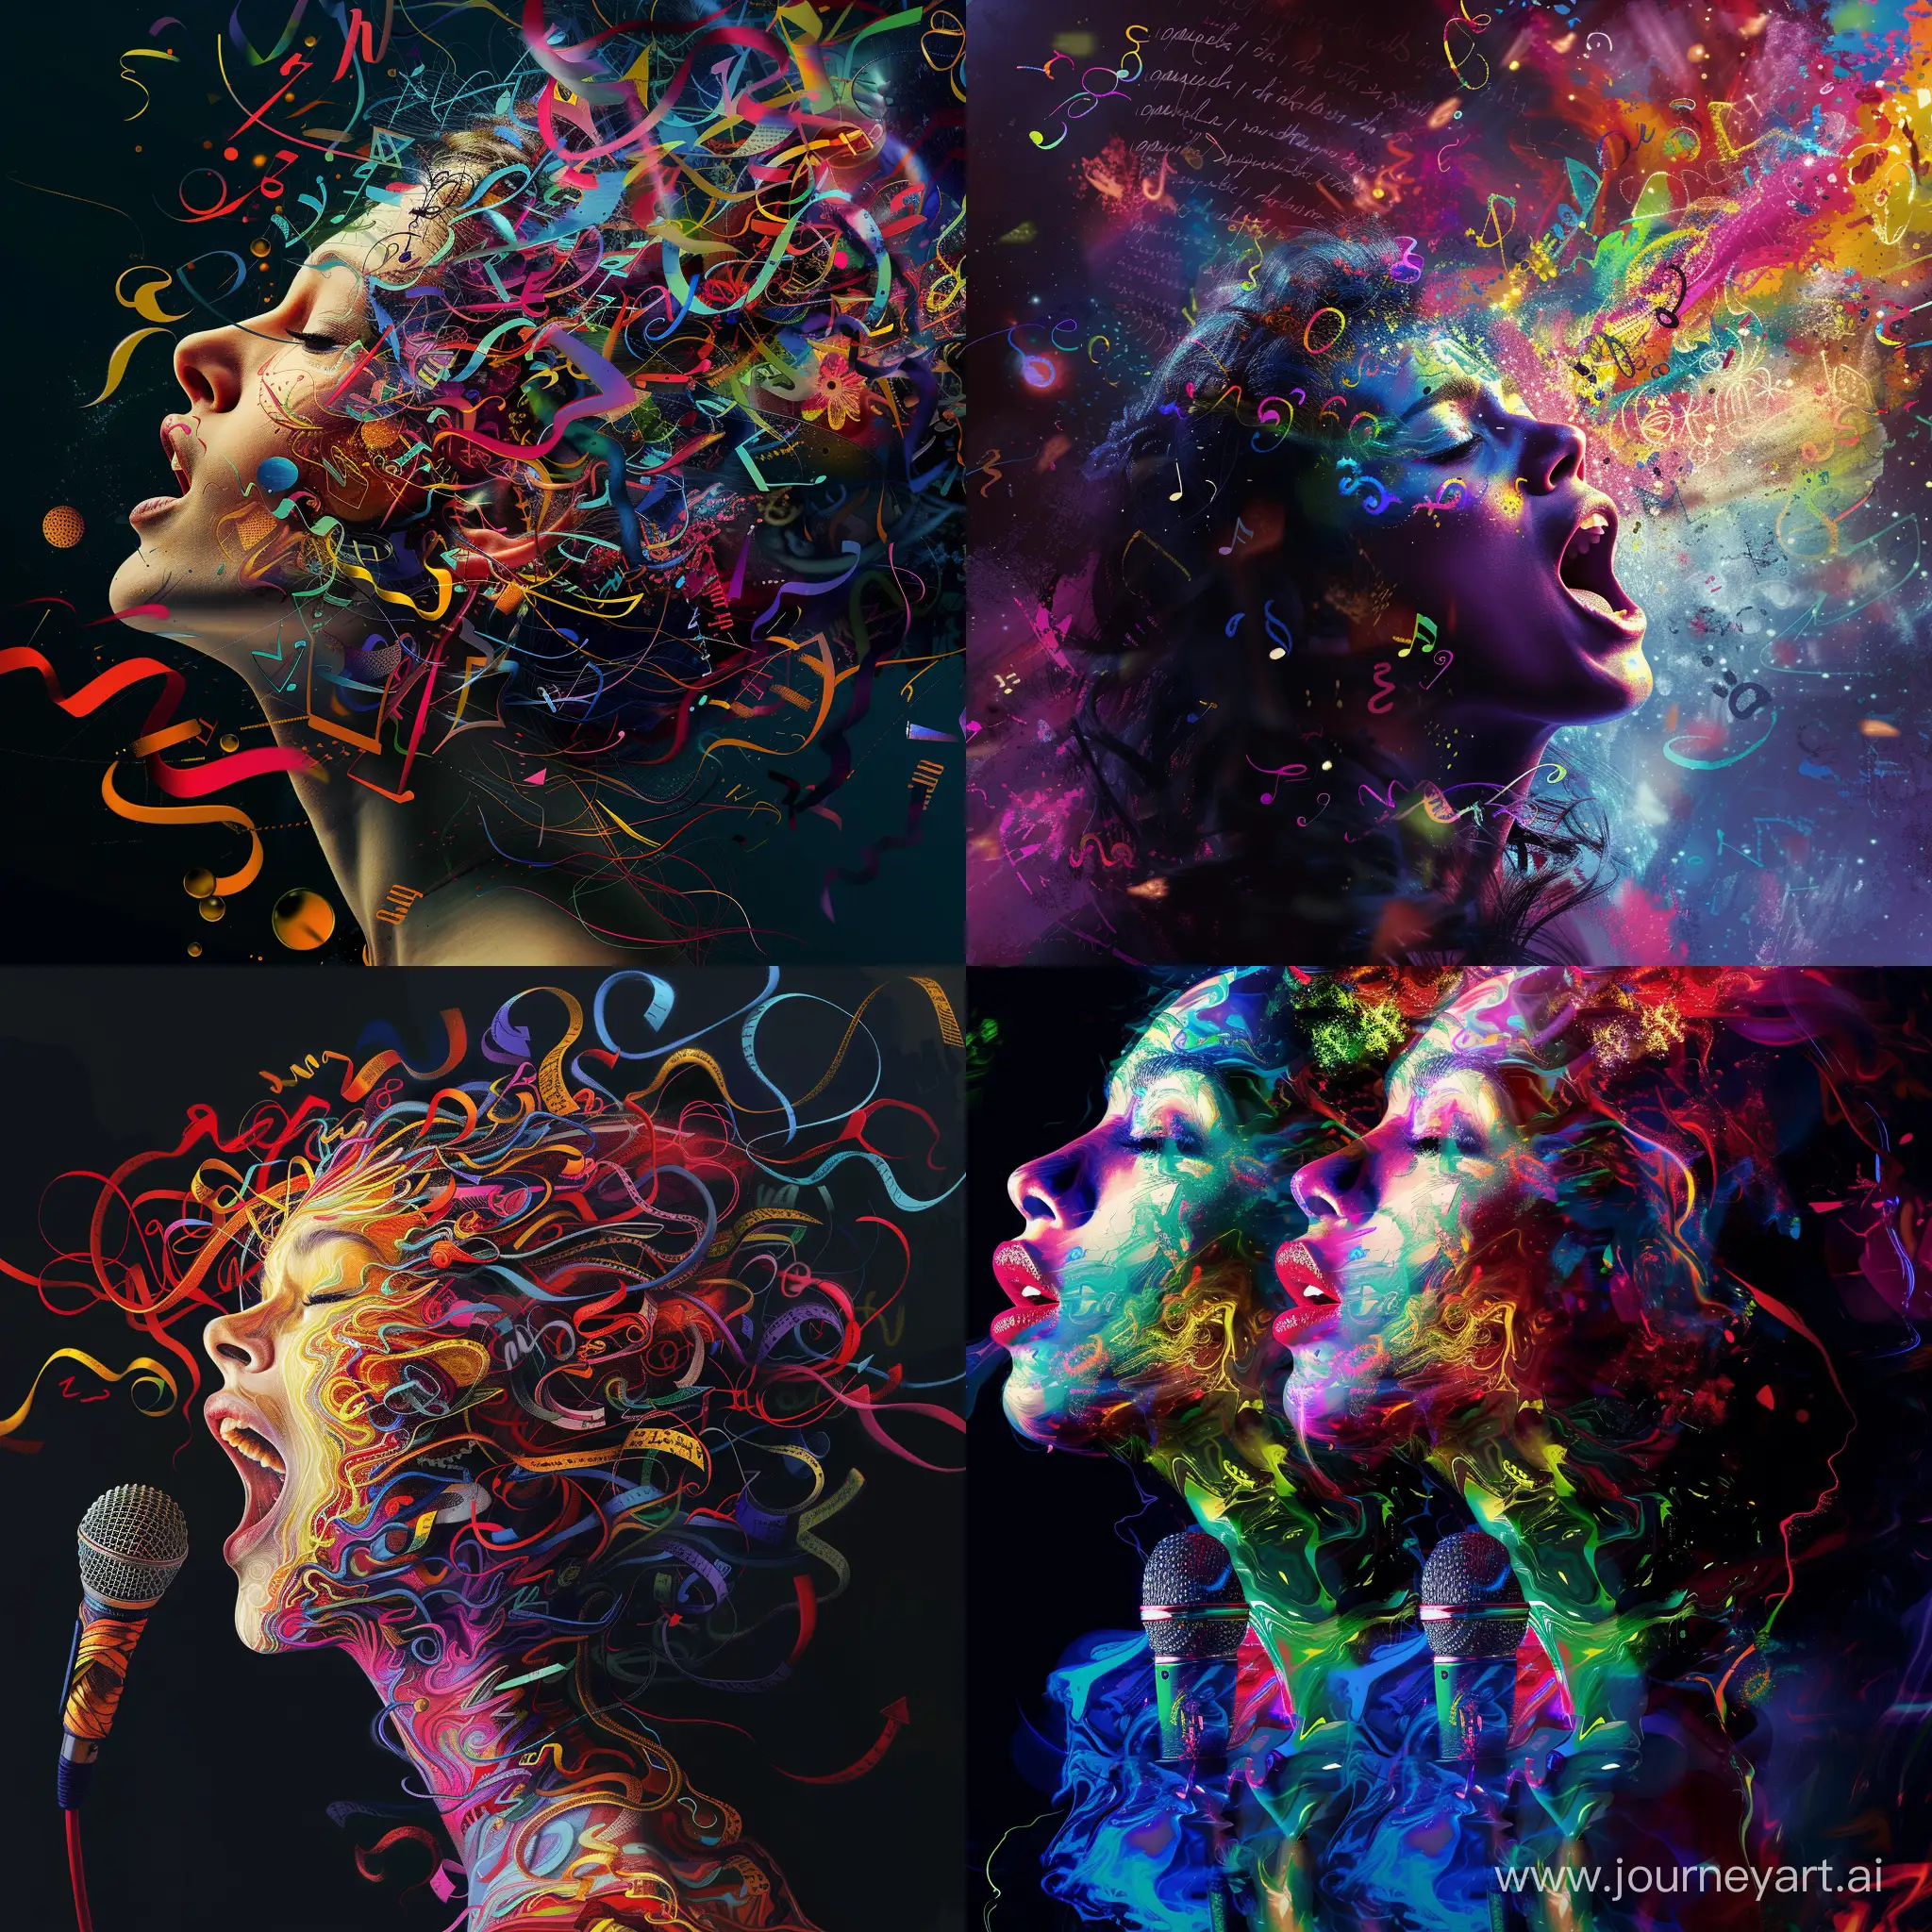 vividly colored photorealistic image of female creativity expressed through words, song and sound